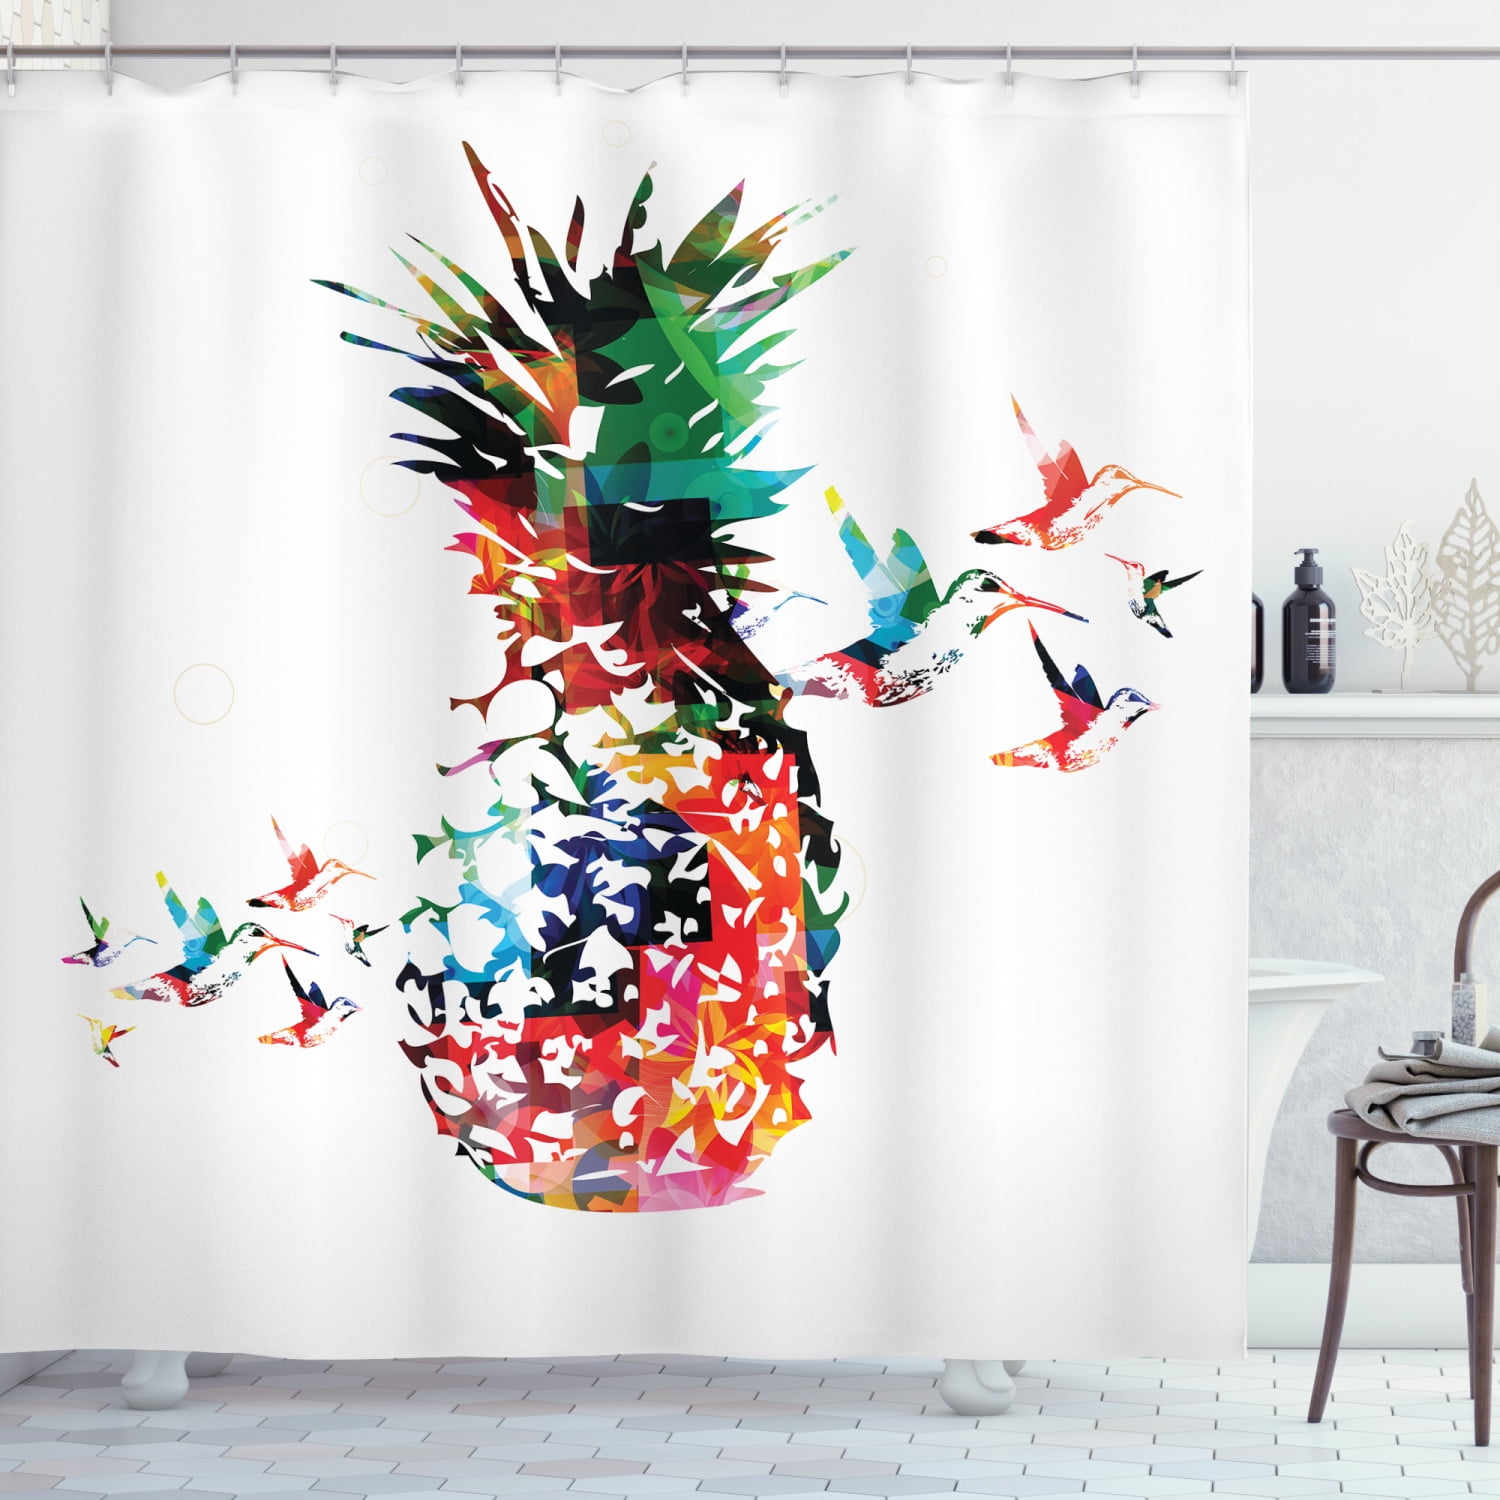 Pineapple Shower Curtain Waterproof Polyester Fabric with Hooks Bathroom 